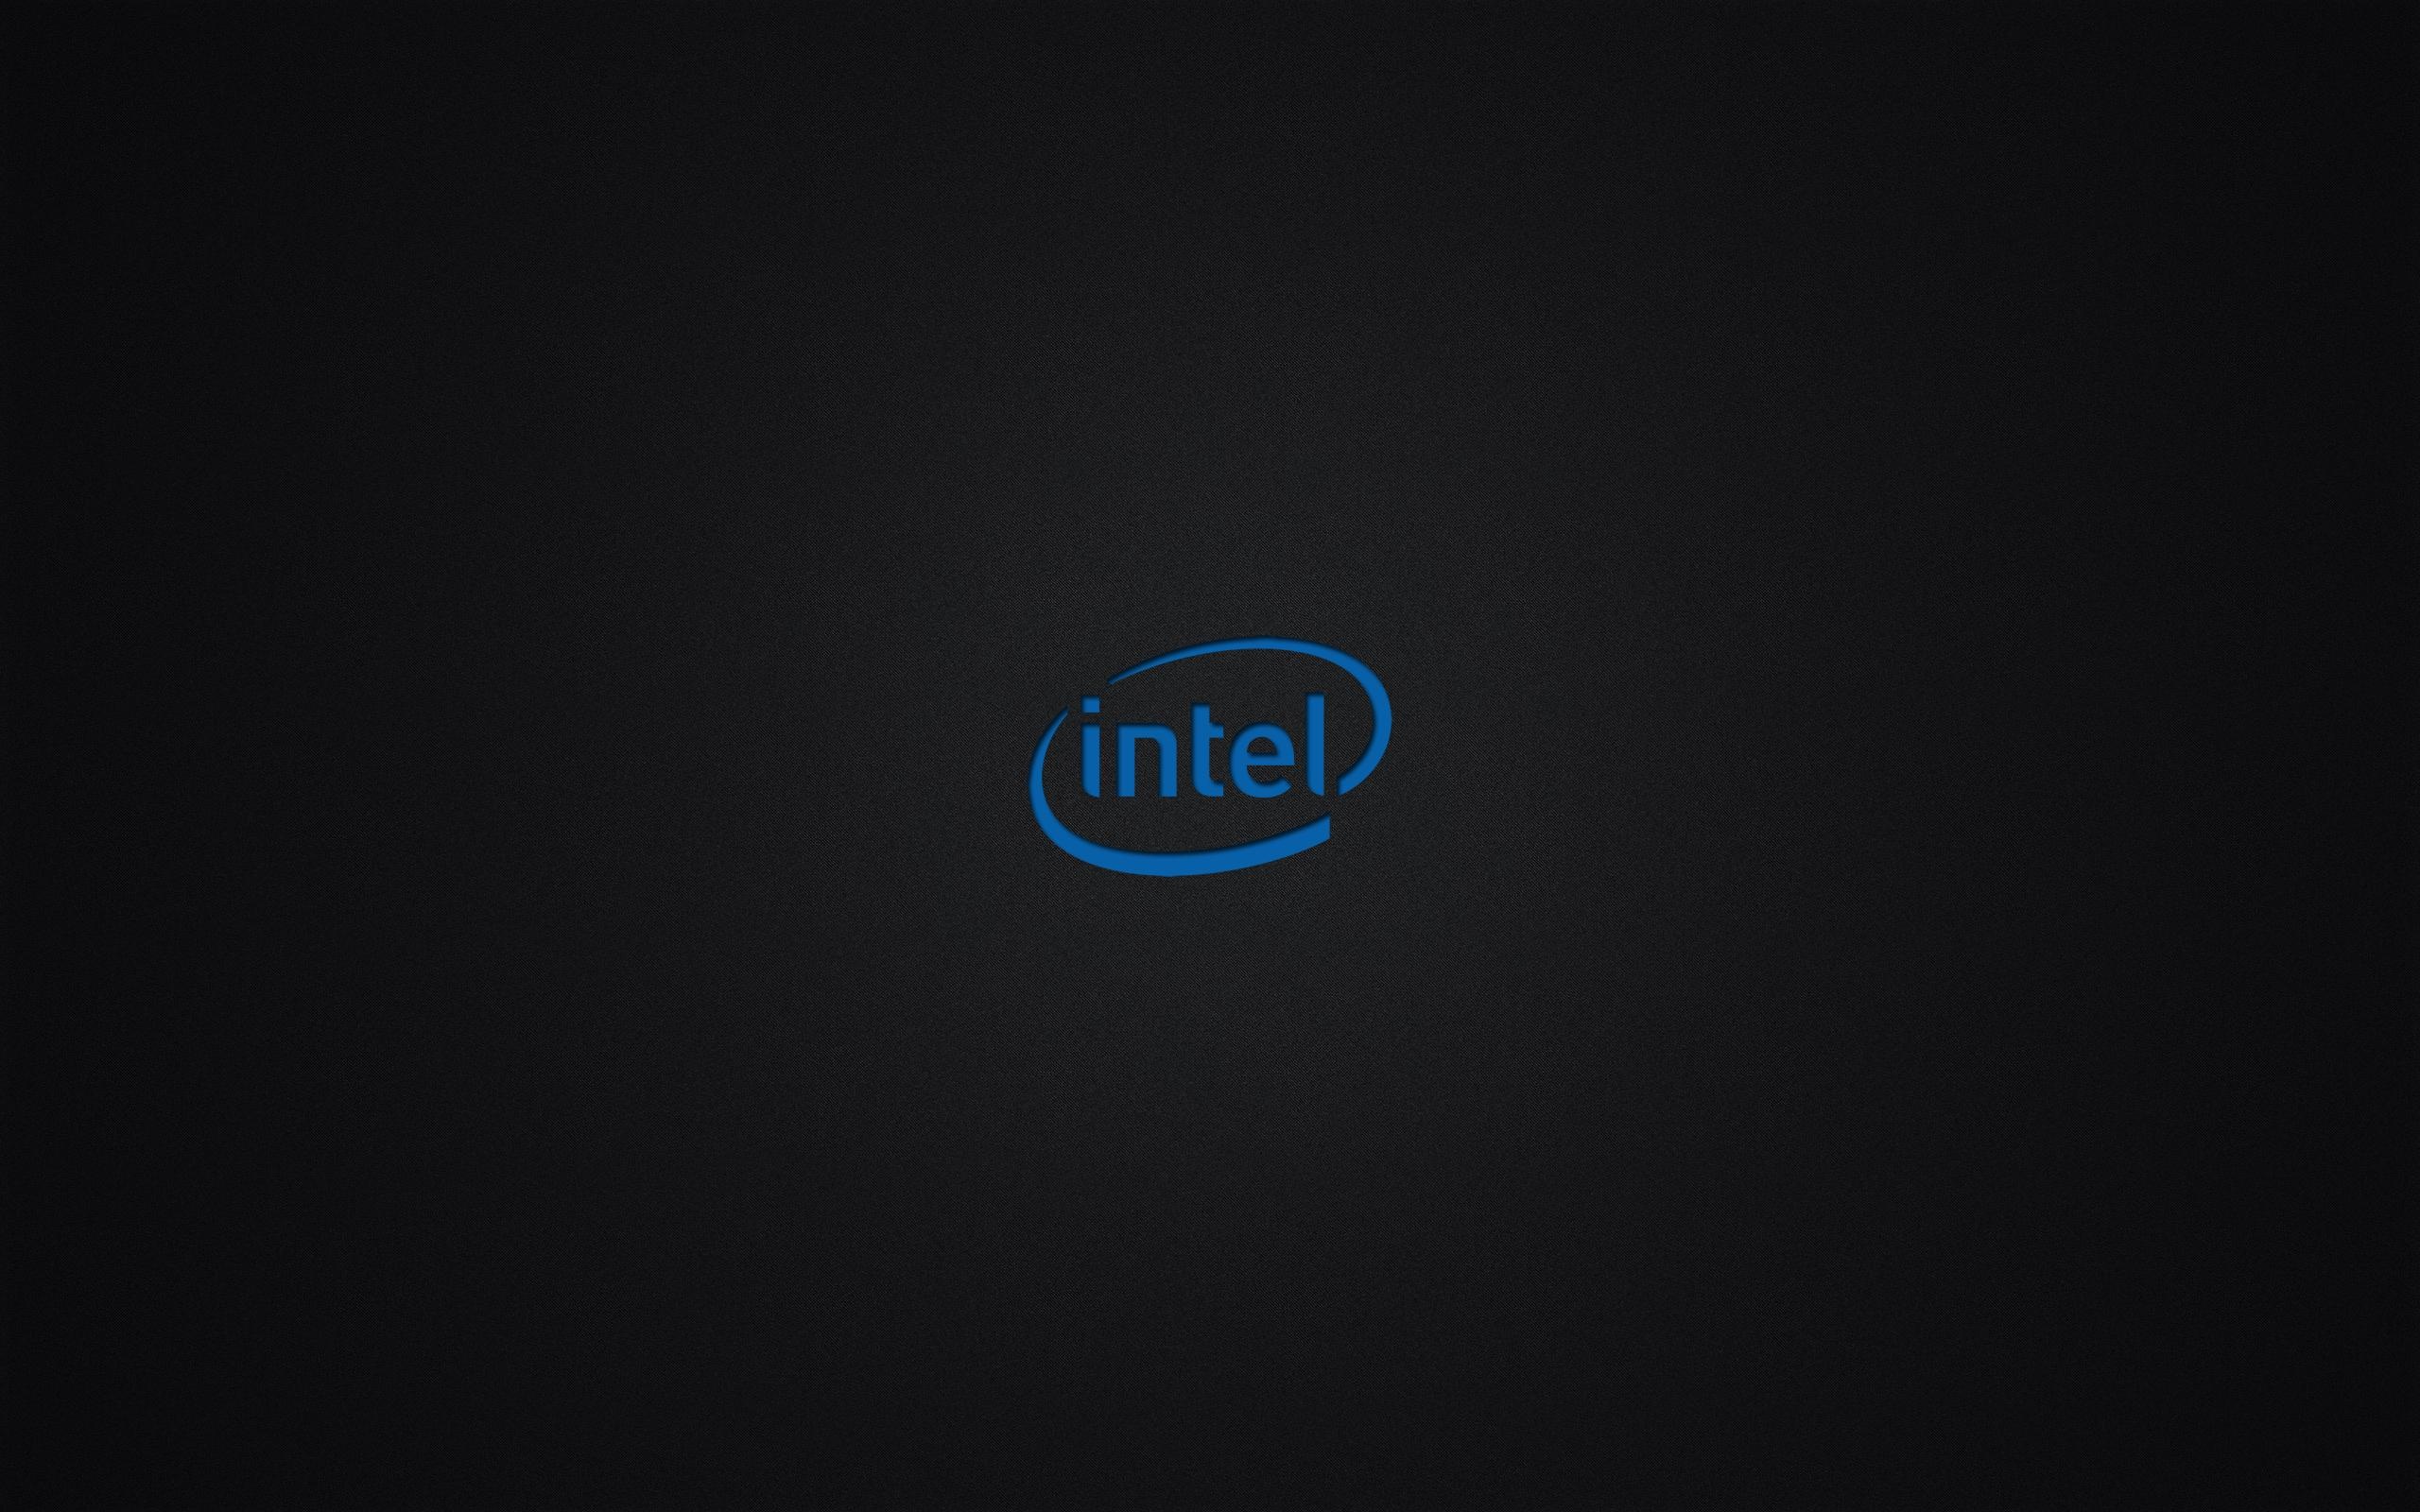 Intel Wallpapers - Top Free Intel Backgrounds 2560x1600